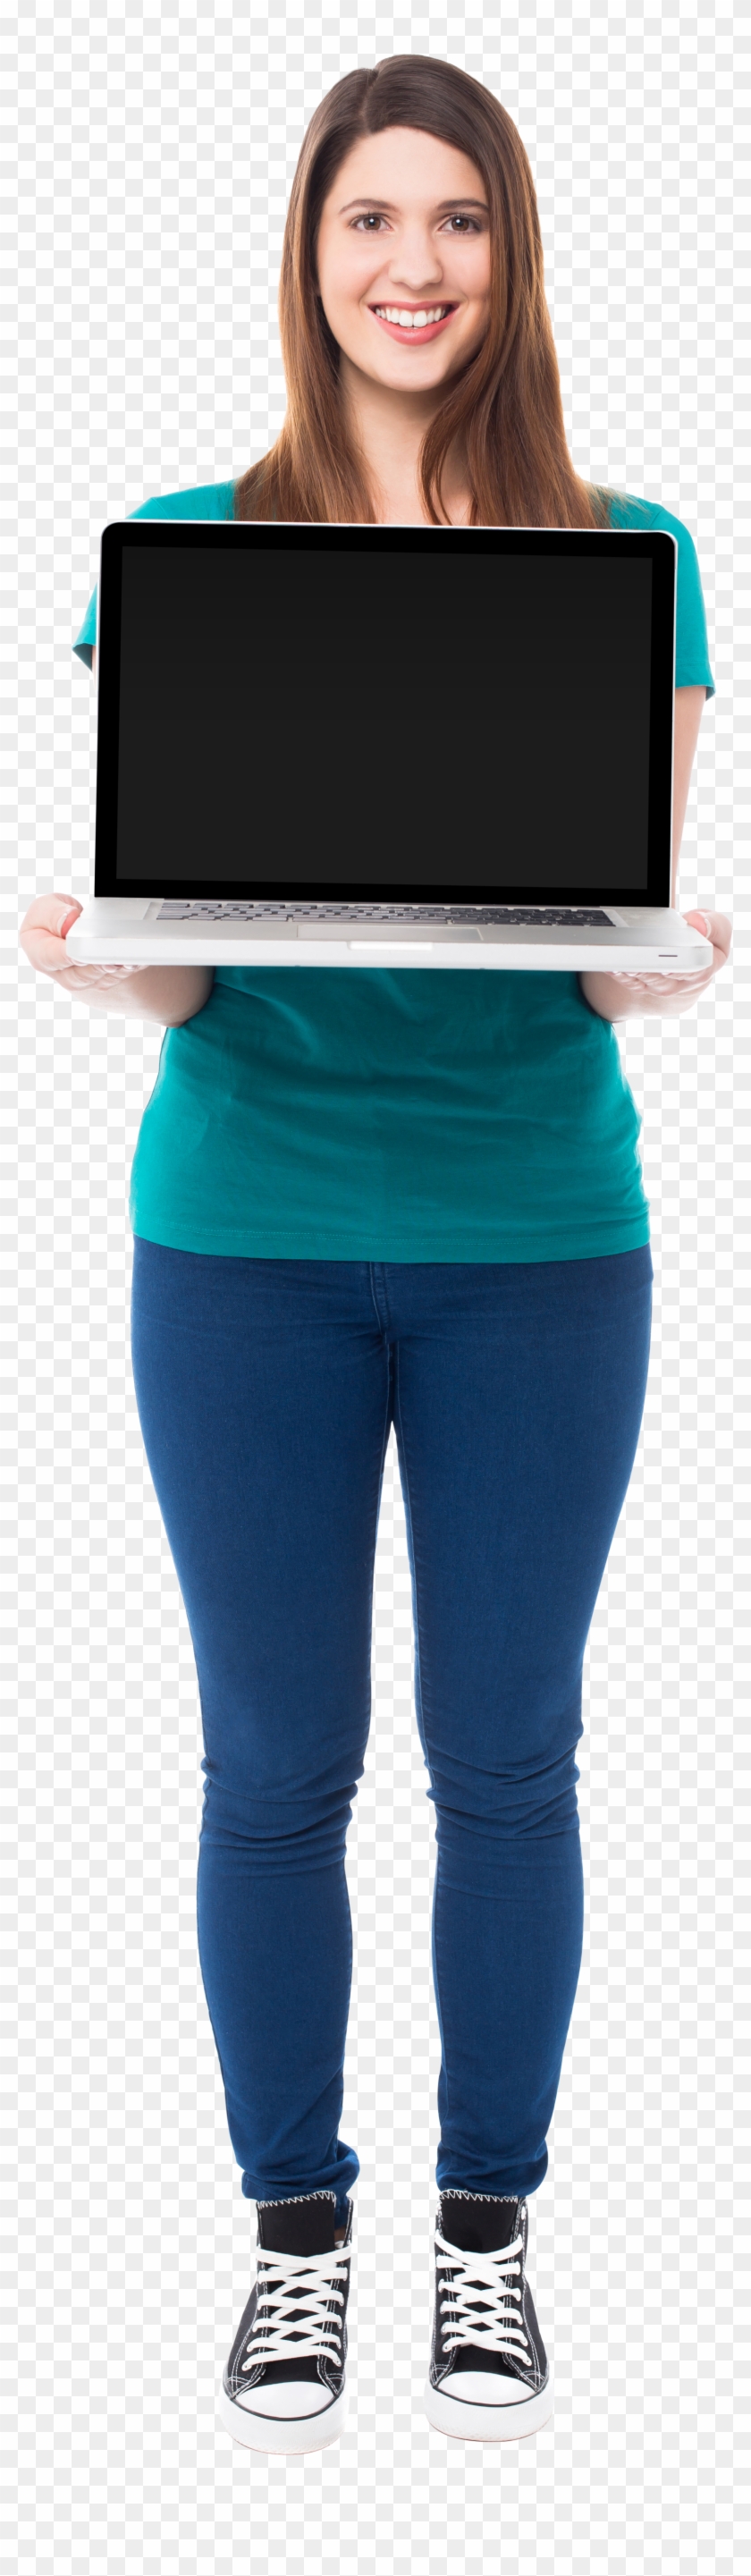 Girl With Laptop - Girl Clipart #1132027